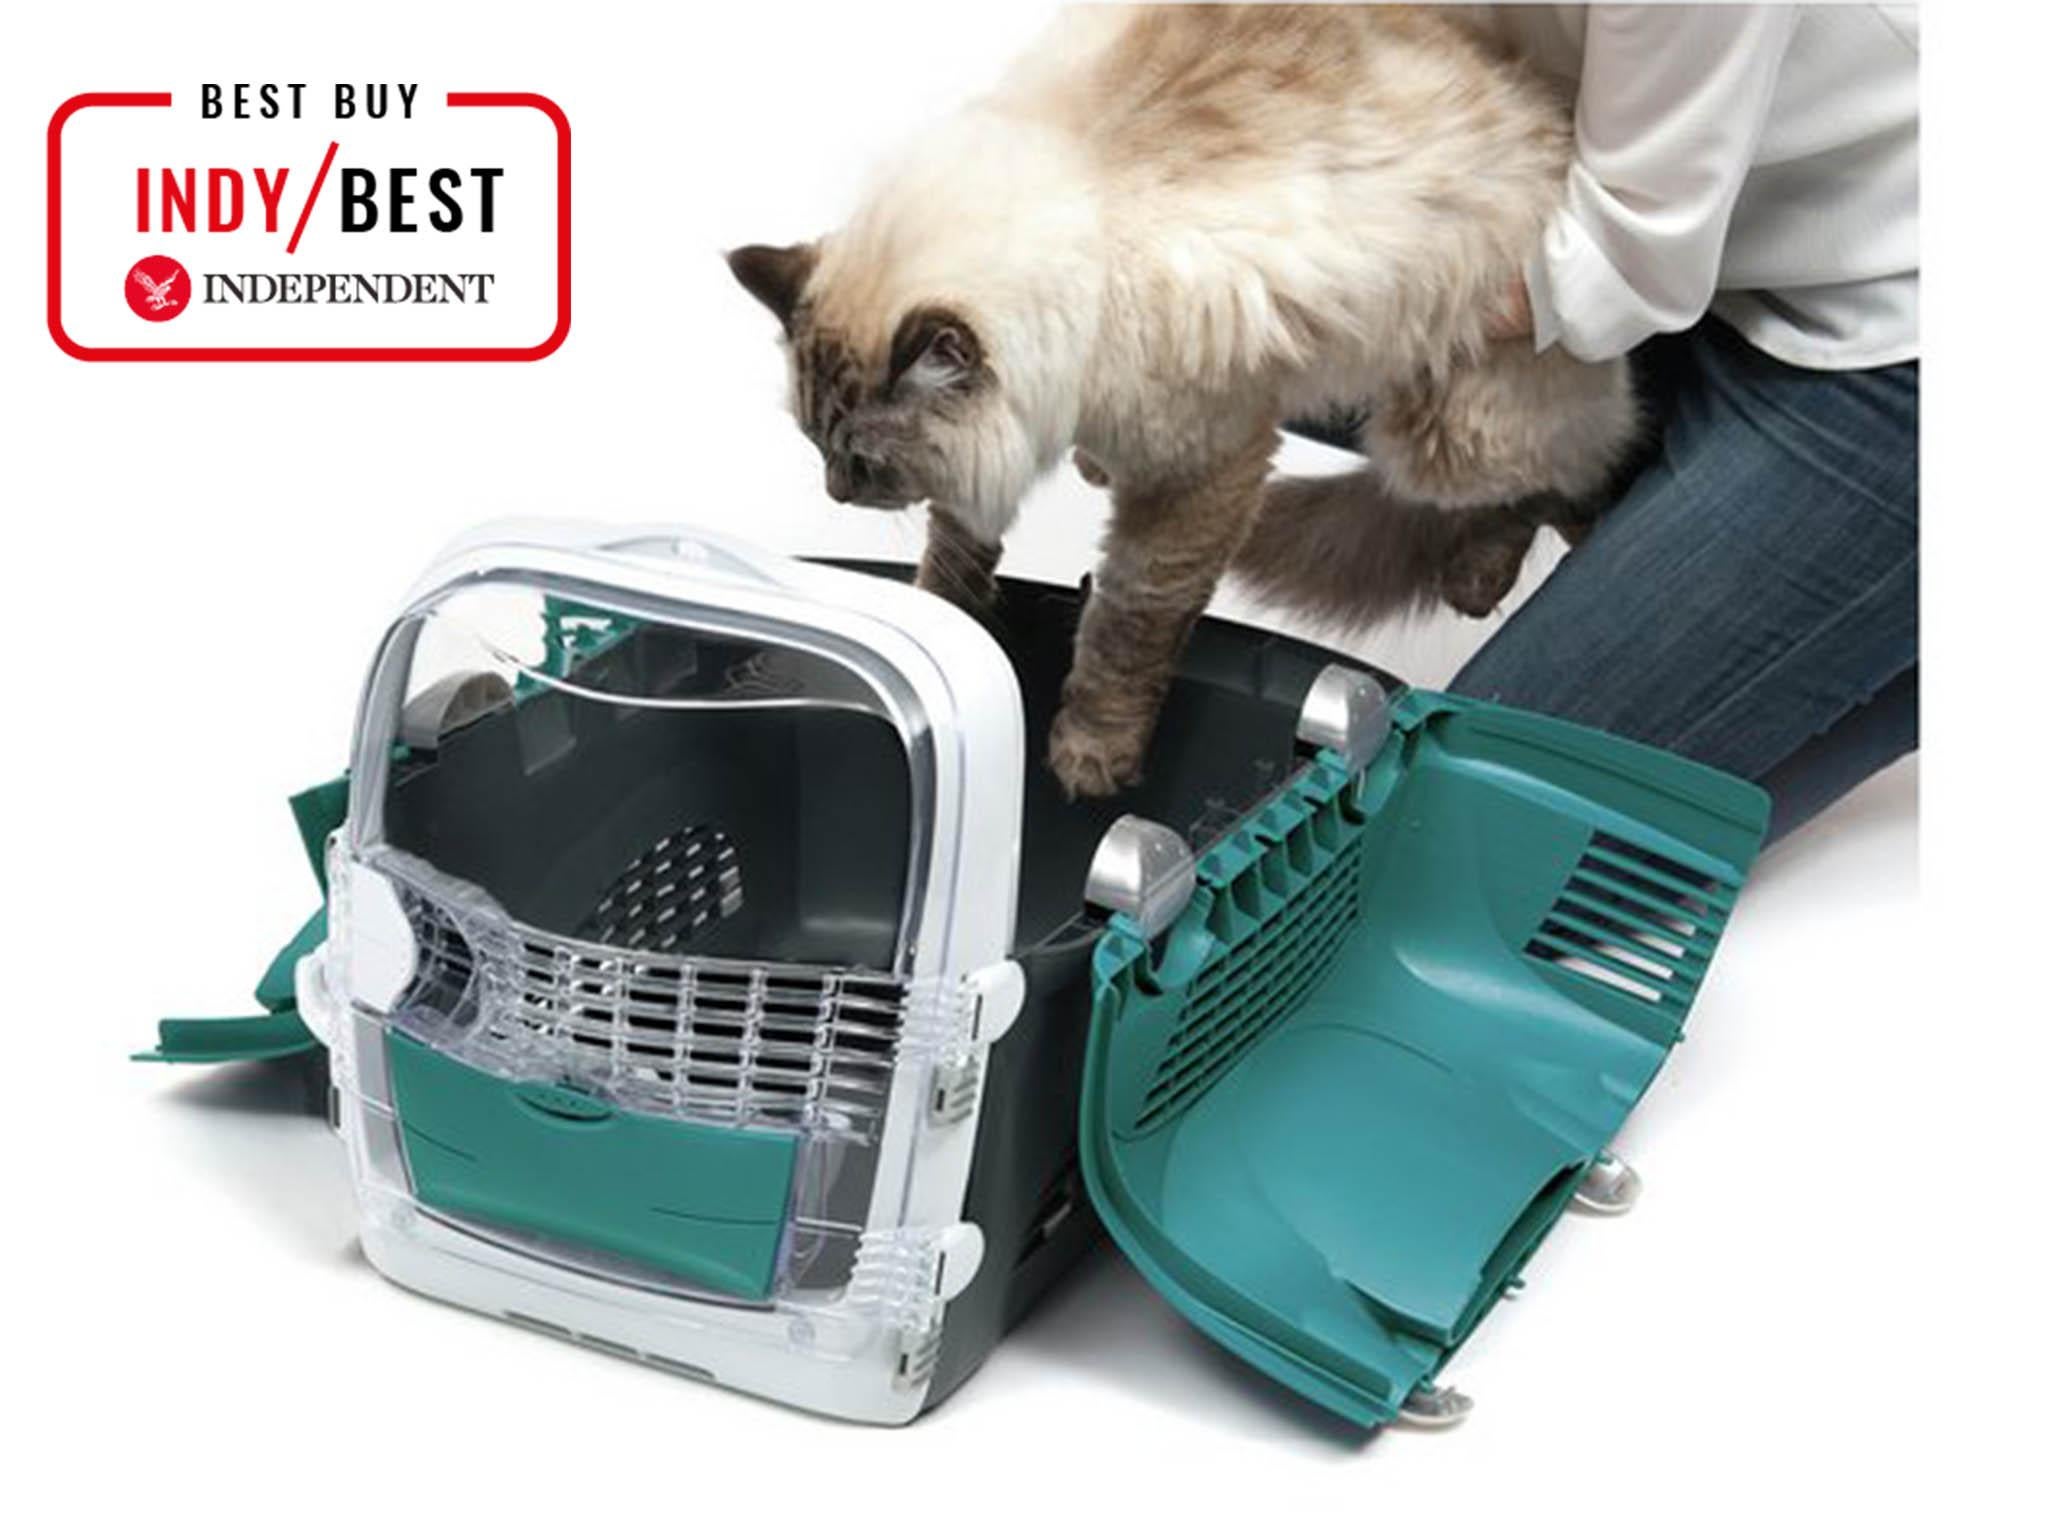 For cats that need coaxing into their carrier, this unfolds to help them in gently